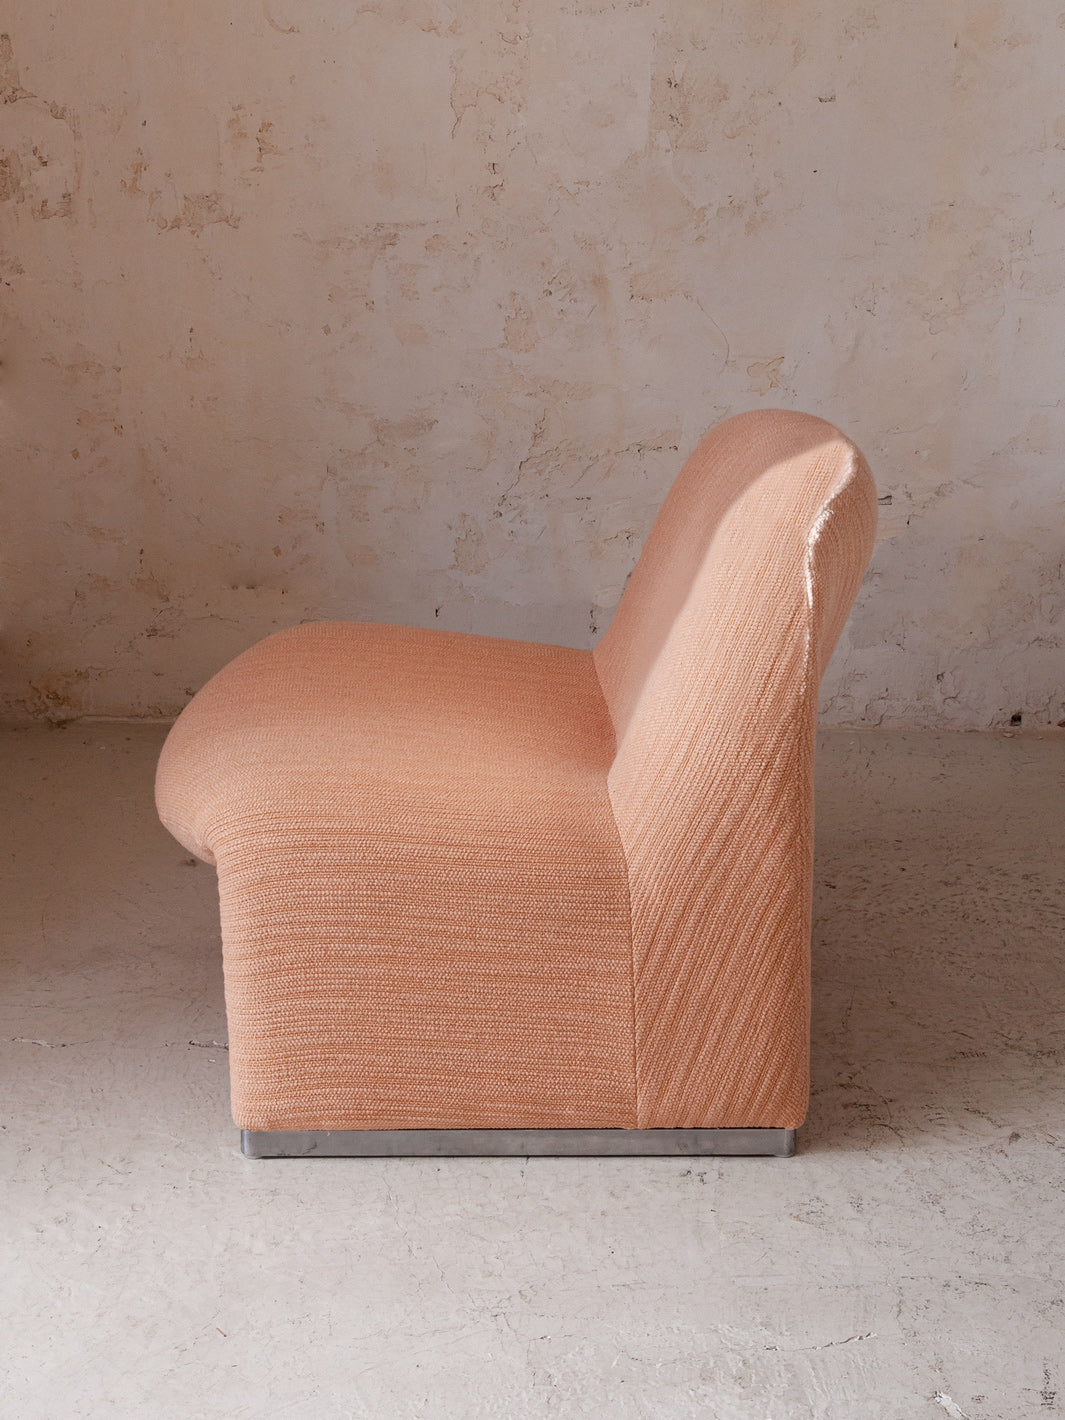 Pair of Alky armchairs by Giancarlo Piretti from the 70s